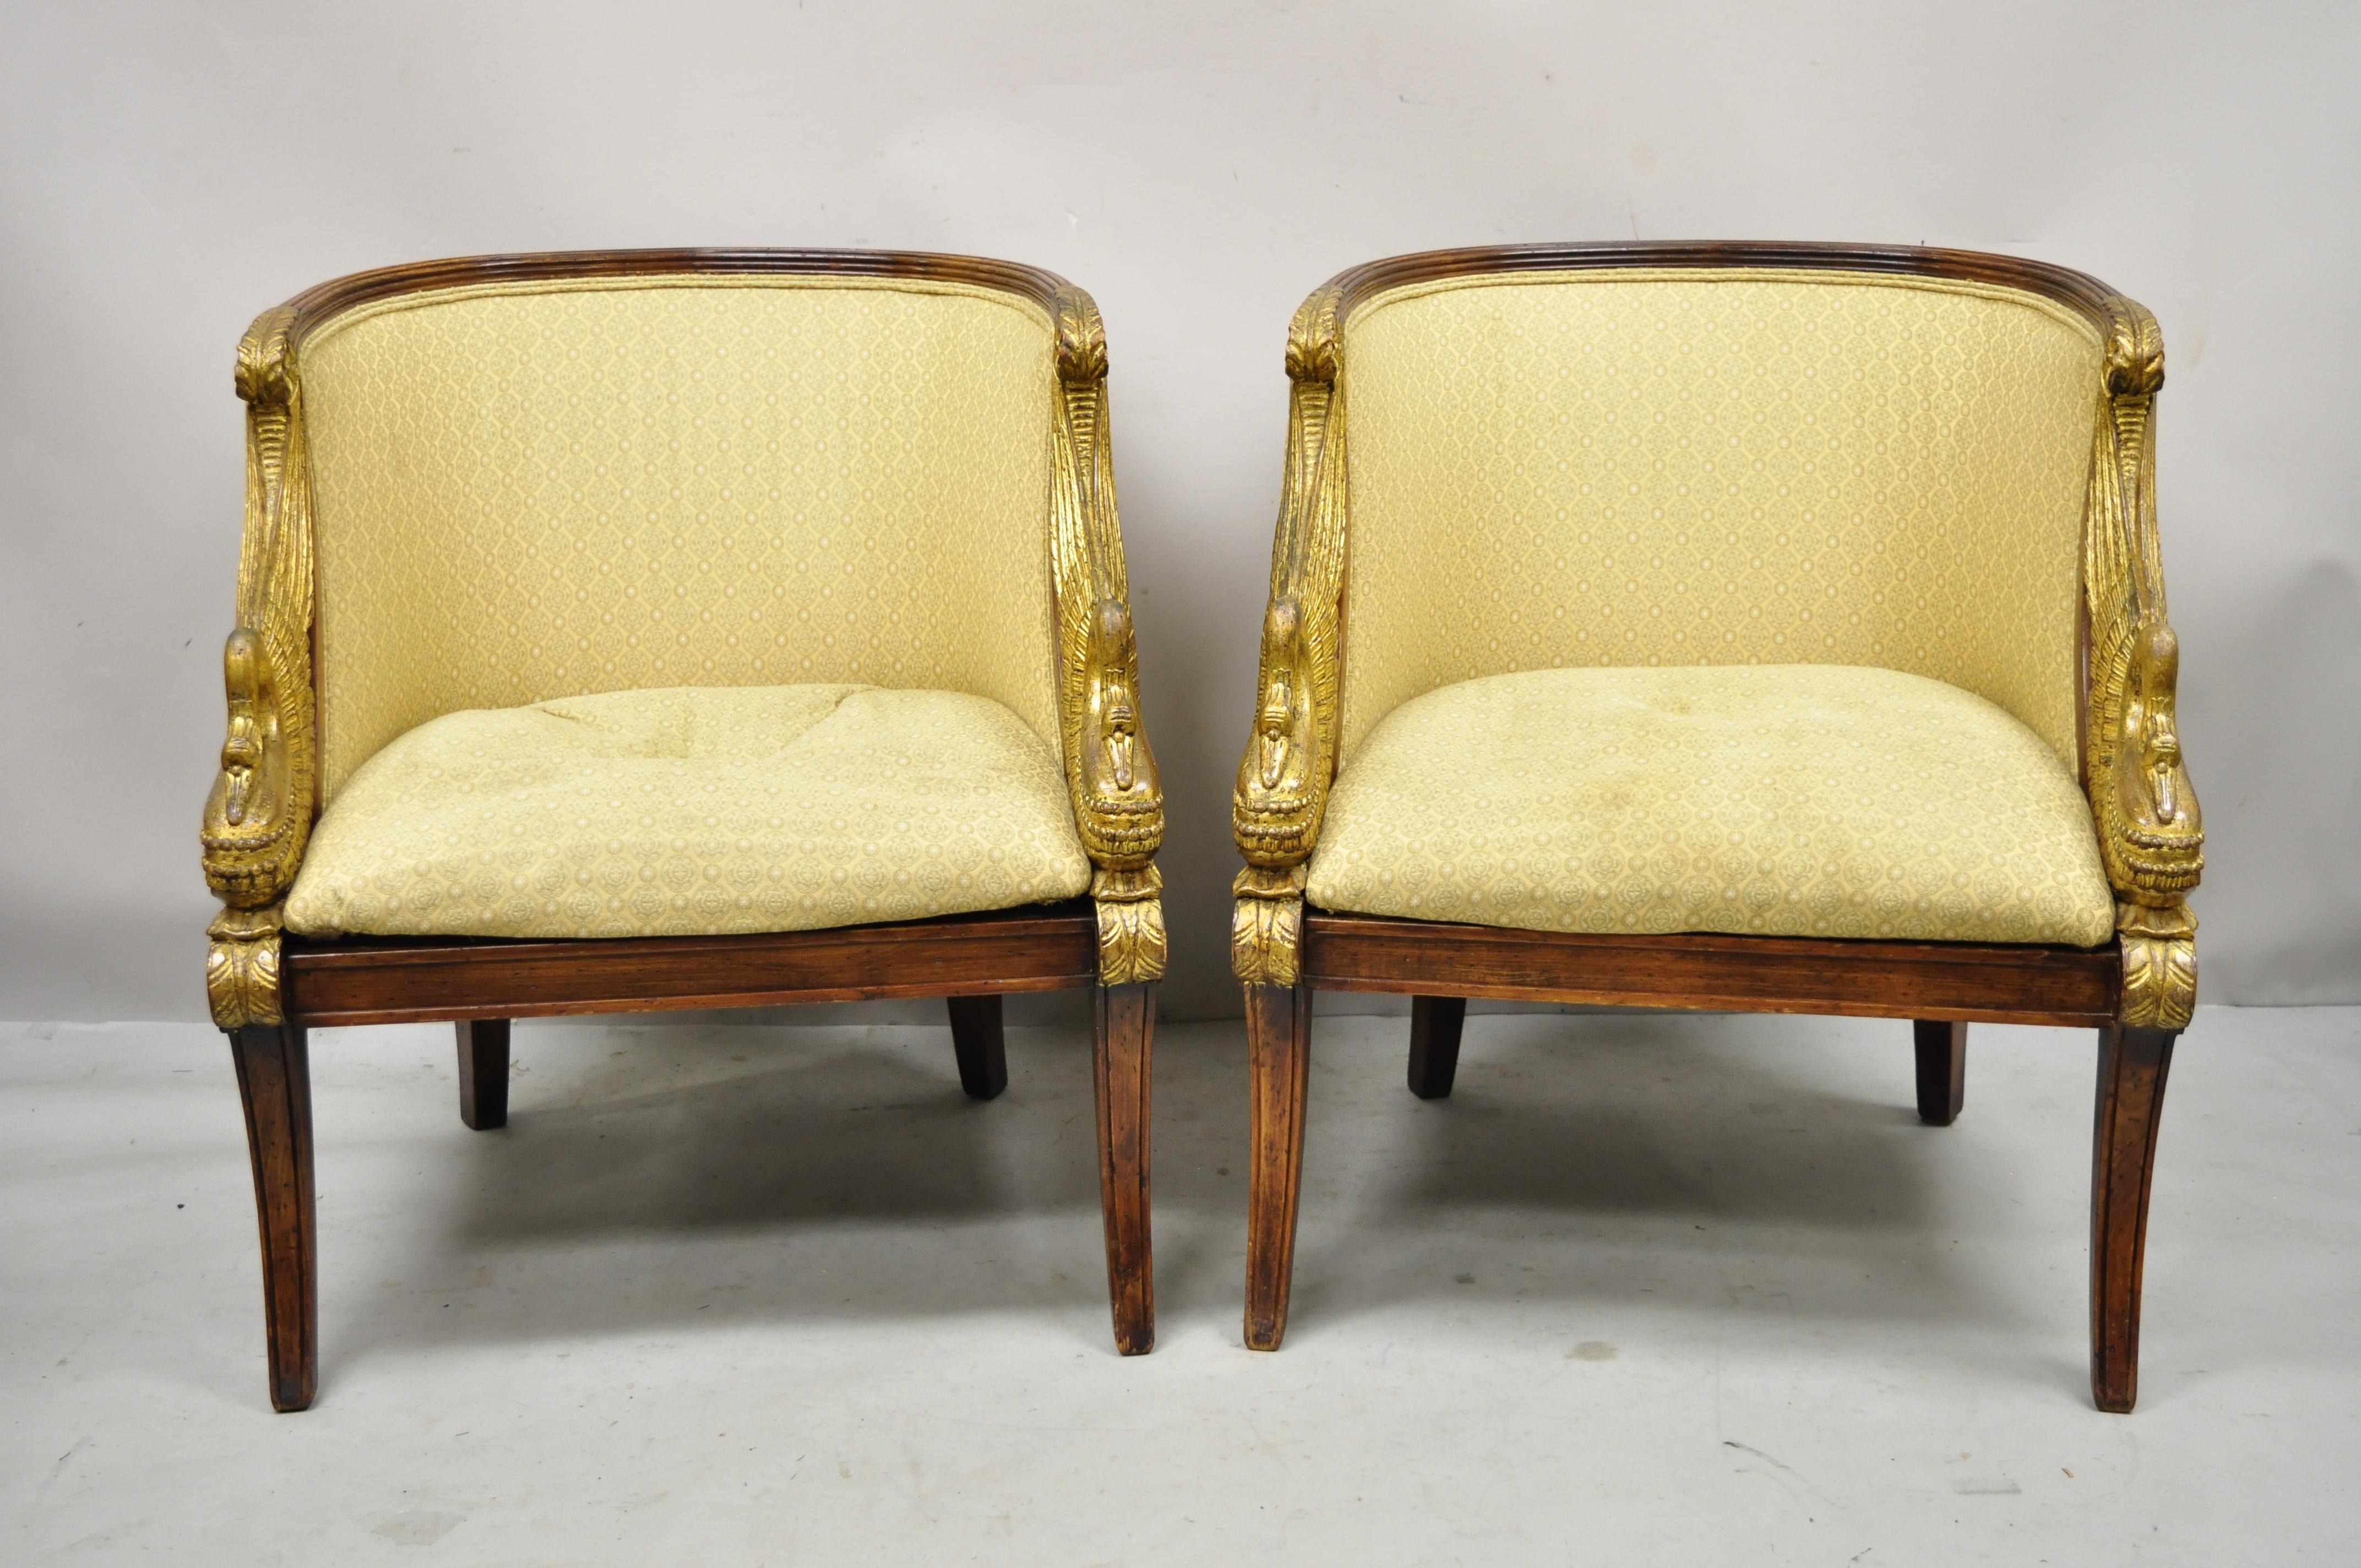 Italian Regency Style carved gold gilt wood swans barrel back club chair - a pair. Item features gold gilt carved wood swans, saber legs, barrel backs, solid wood frames, distressed finish, nicely carved details, quality craftsmanship, great style